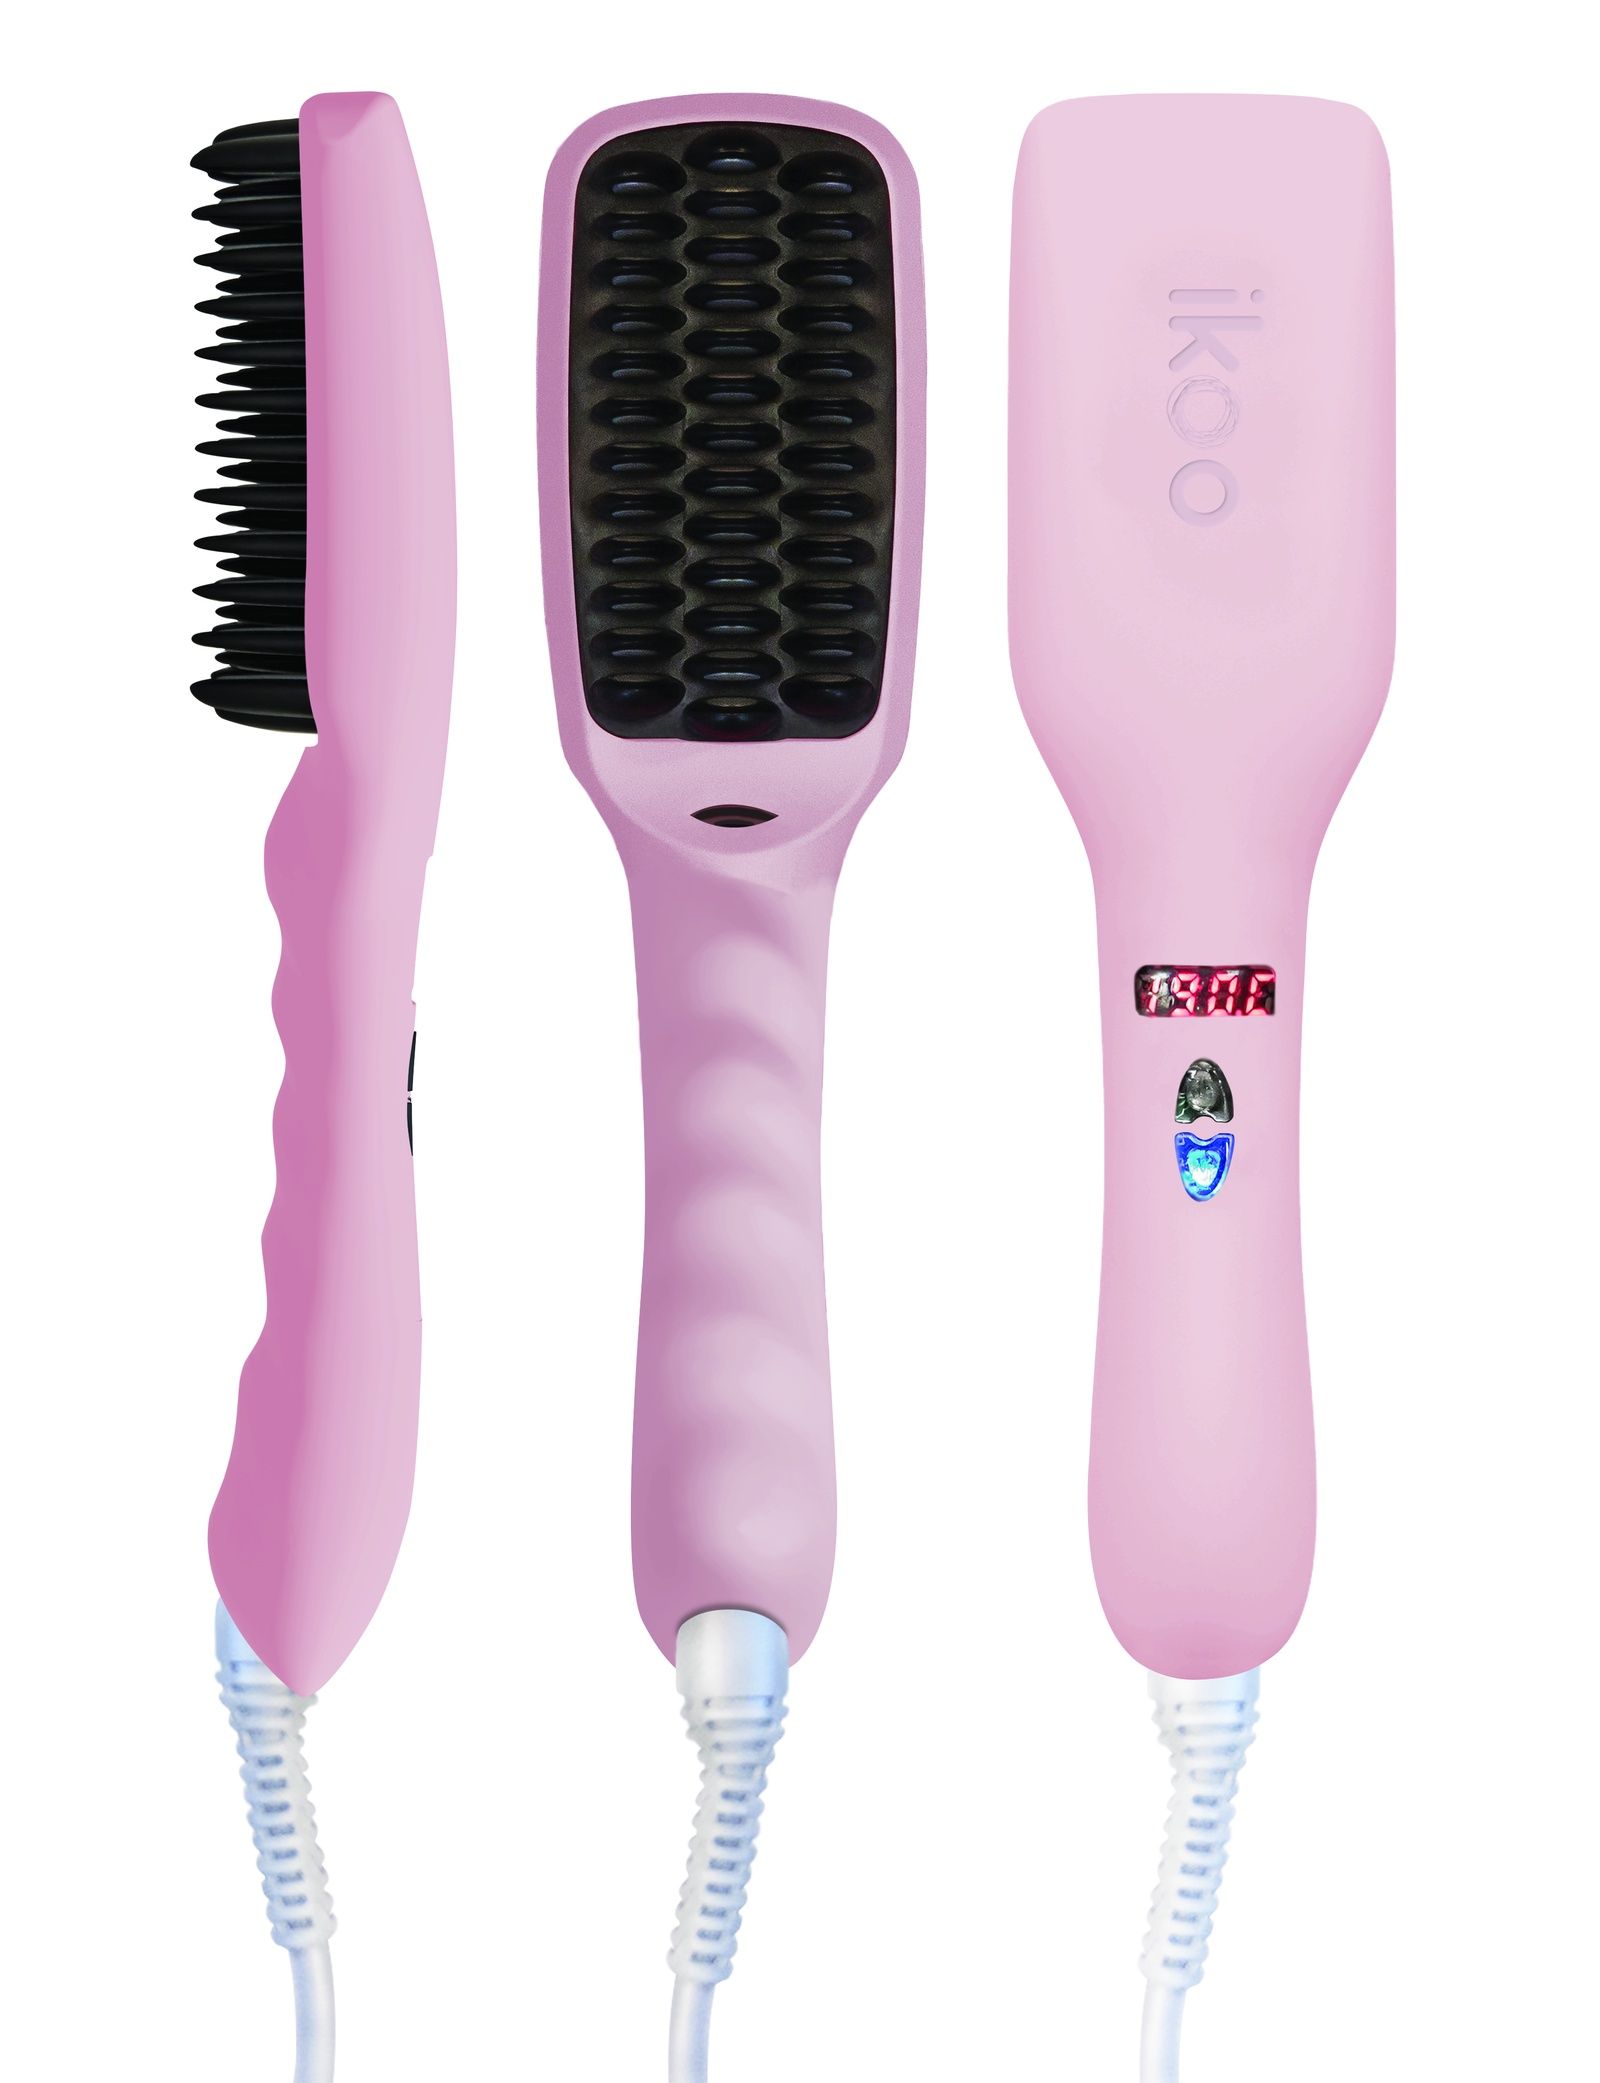    Ikoo e-styler - cotton candy, 292133, 